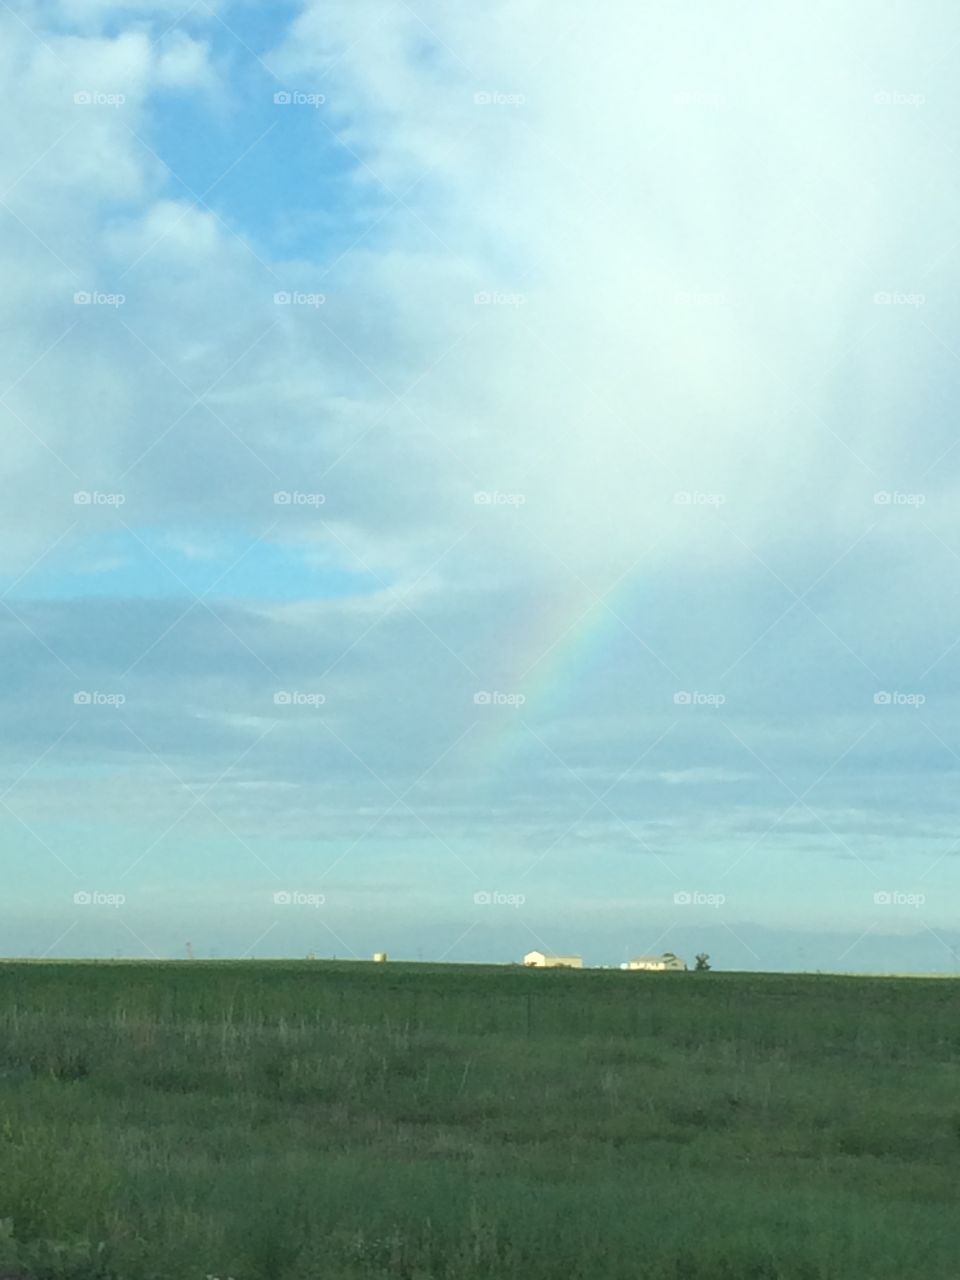 Denver Rainbow. Took this on the way to the Denver airport